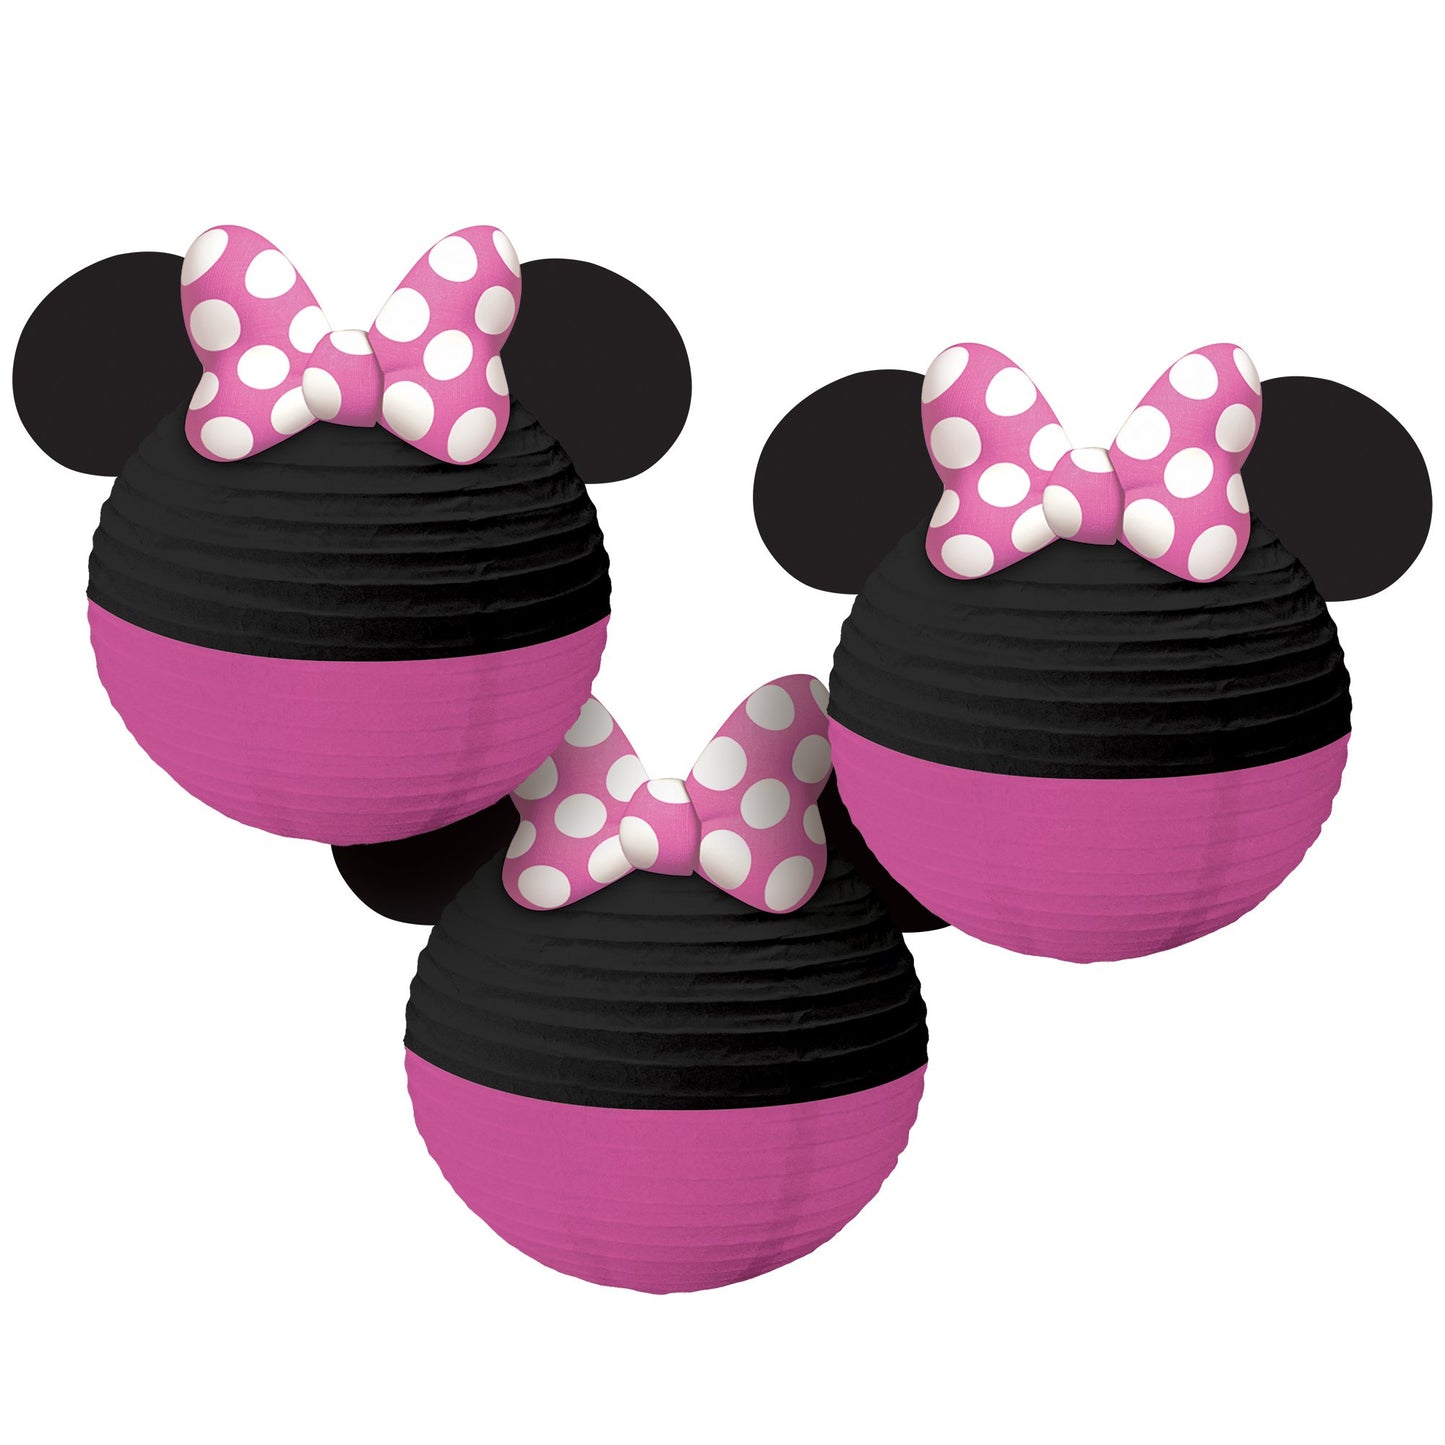 Minnie Mouse Forever Hanging Paper Lantern Decoration Kit - 3ct